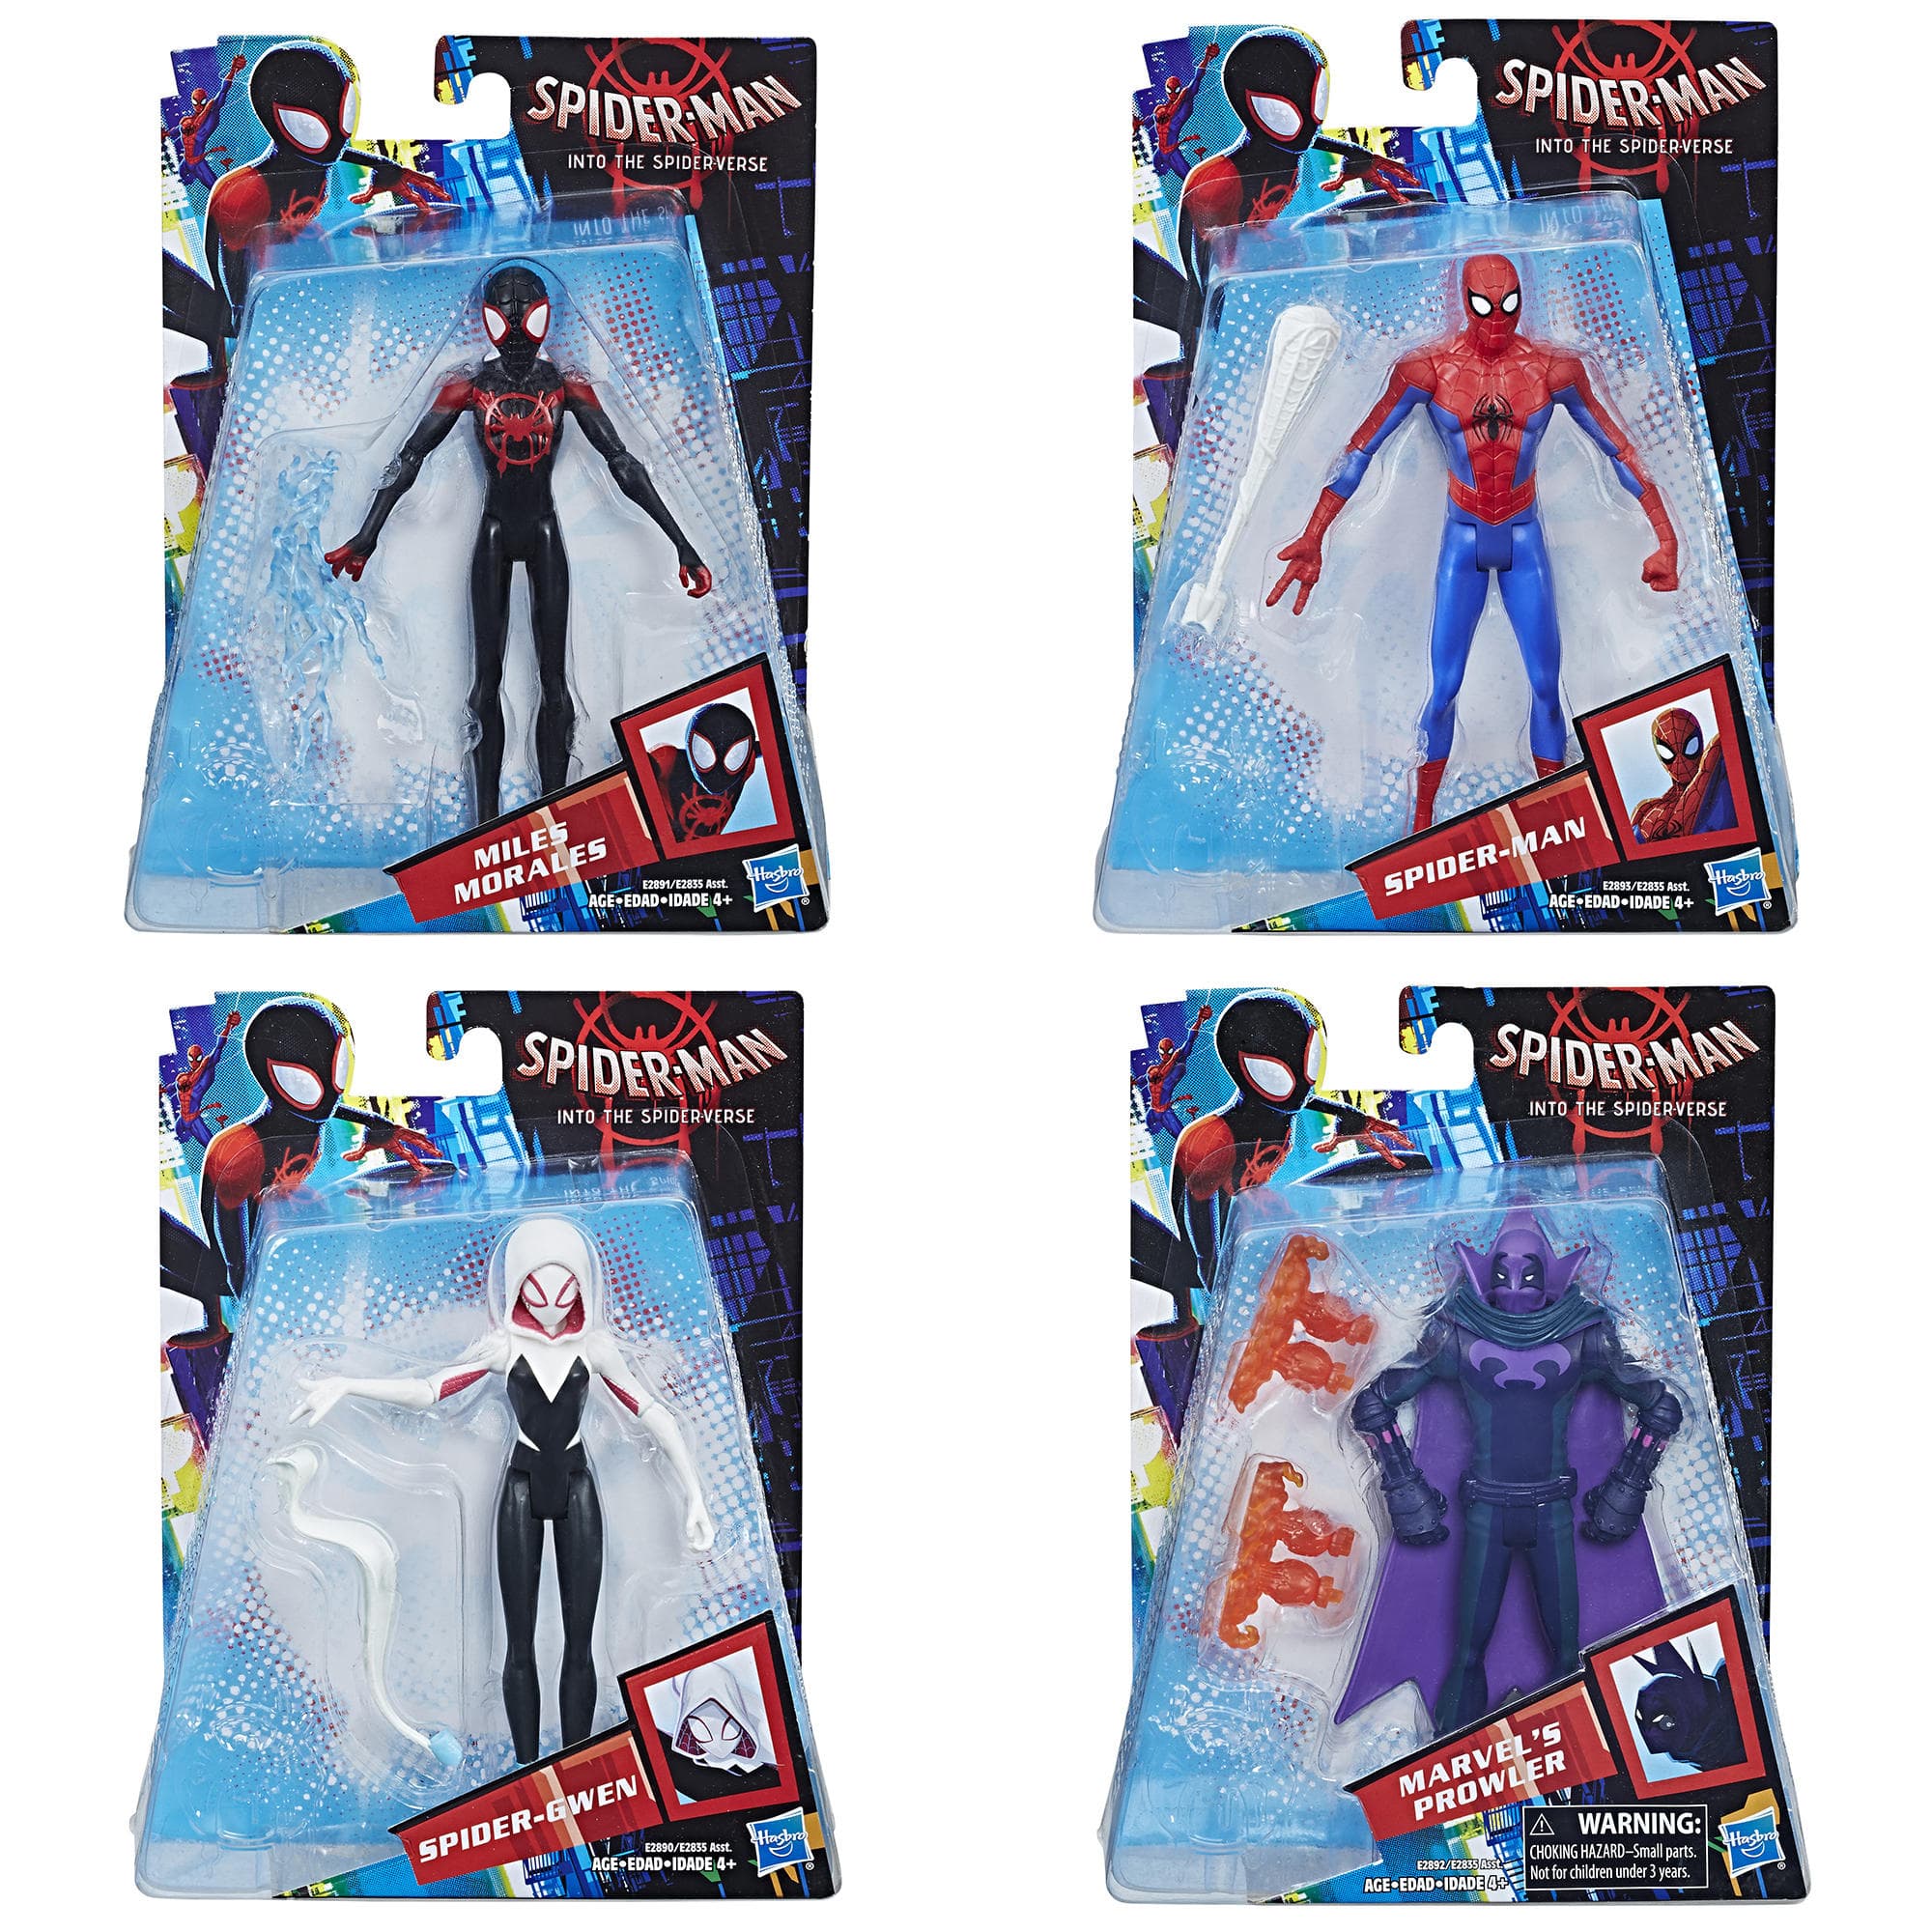 "Spider-Man: Into the Spider-Verse" action figures